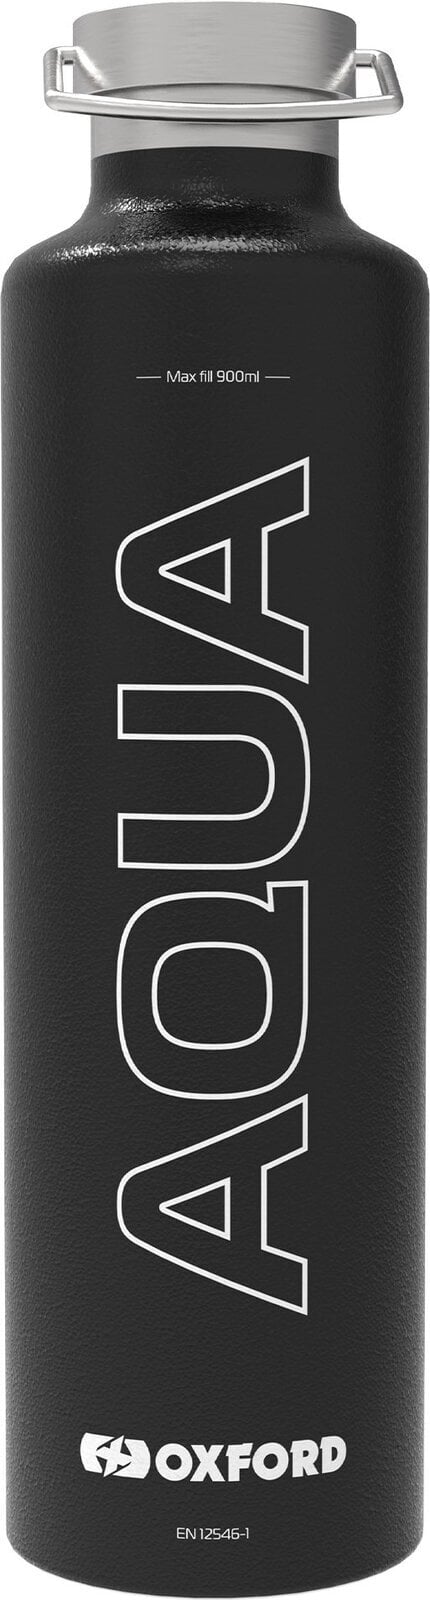 Motorcycle Other Equipment Oxford Aqua 1.0L Insulated Flask